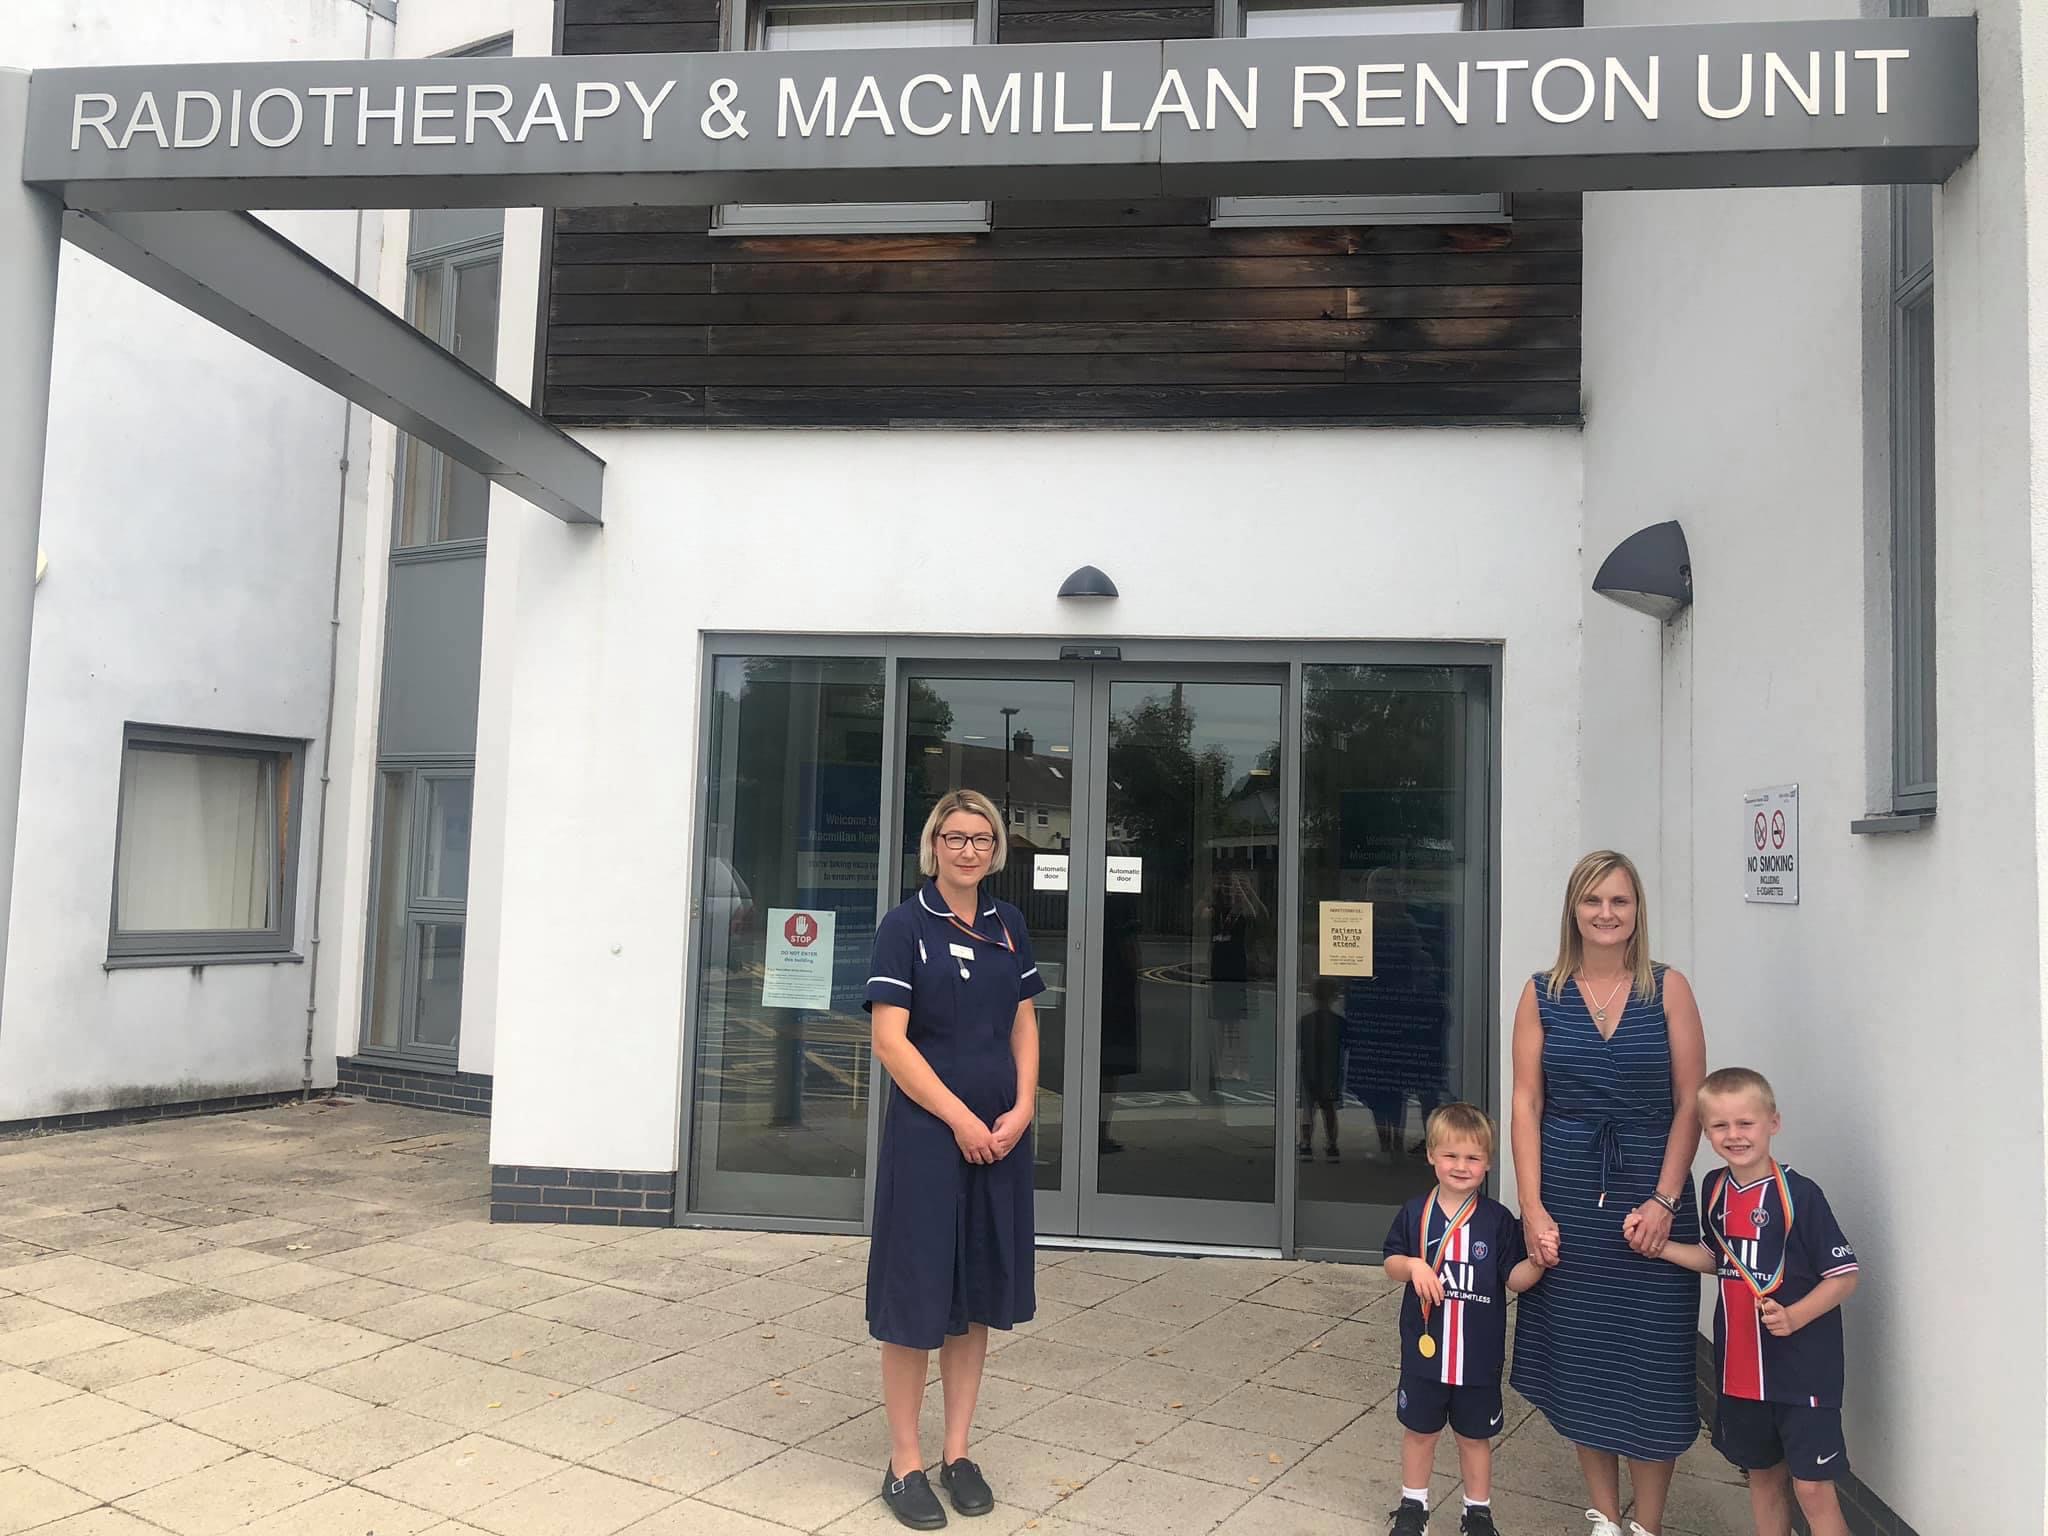 NEWS | Charlie and his brother Henry raise £310 for the Macmillan Renton Unit